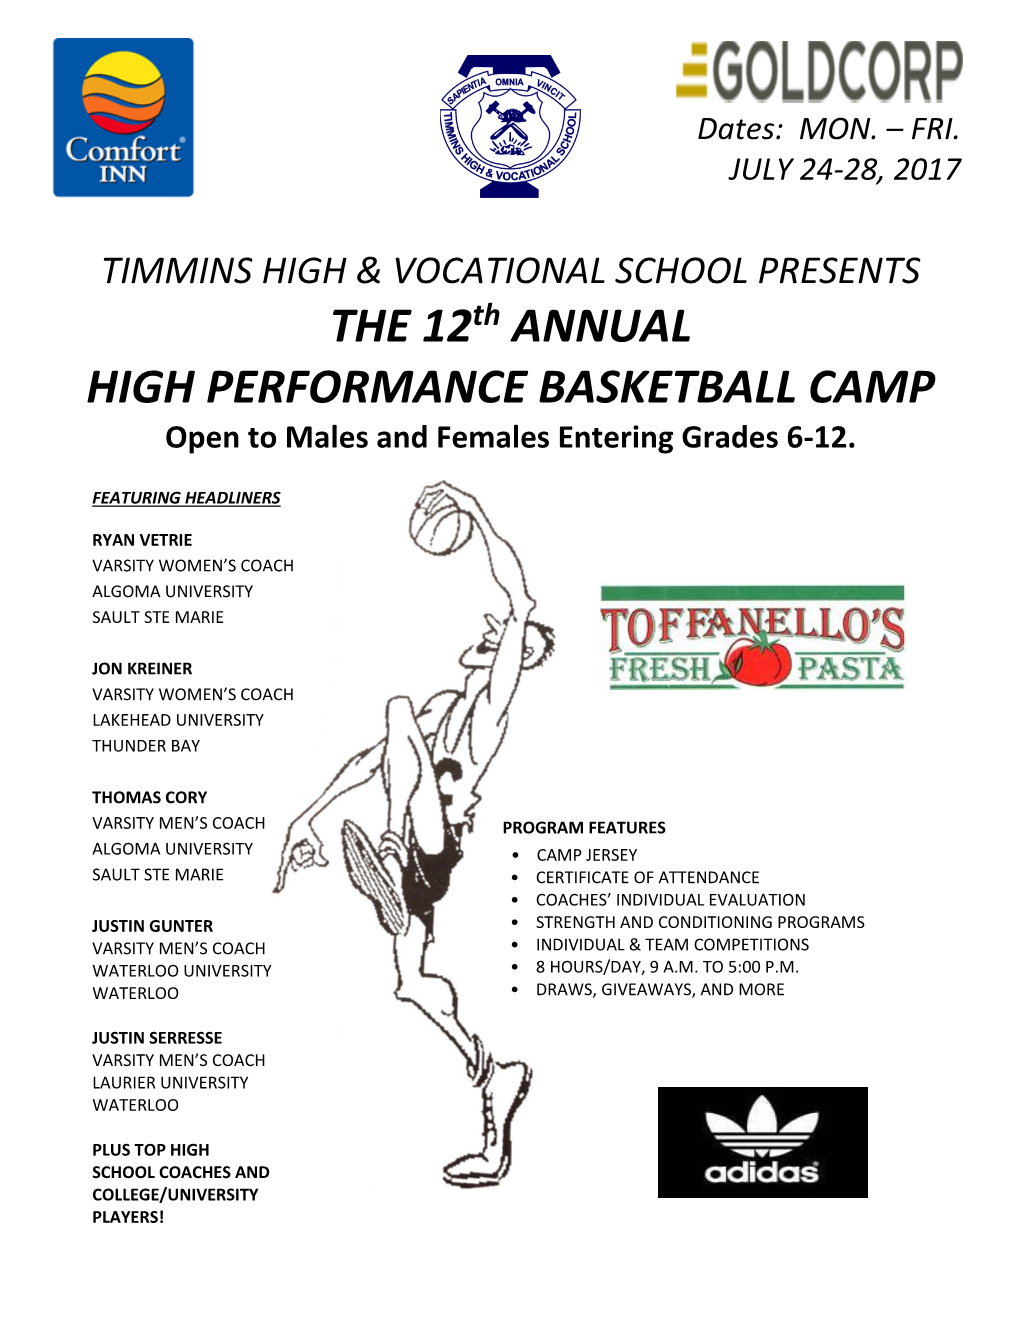 THE 12Th ANNUAL HIGH PERFORMANCE BASKETBALL CAMP Open to Males and Females Entering Grades 6-12